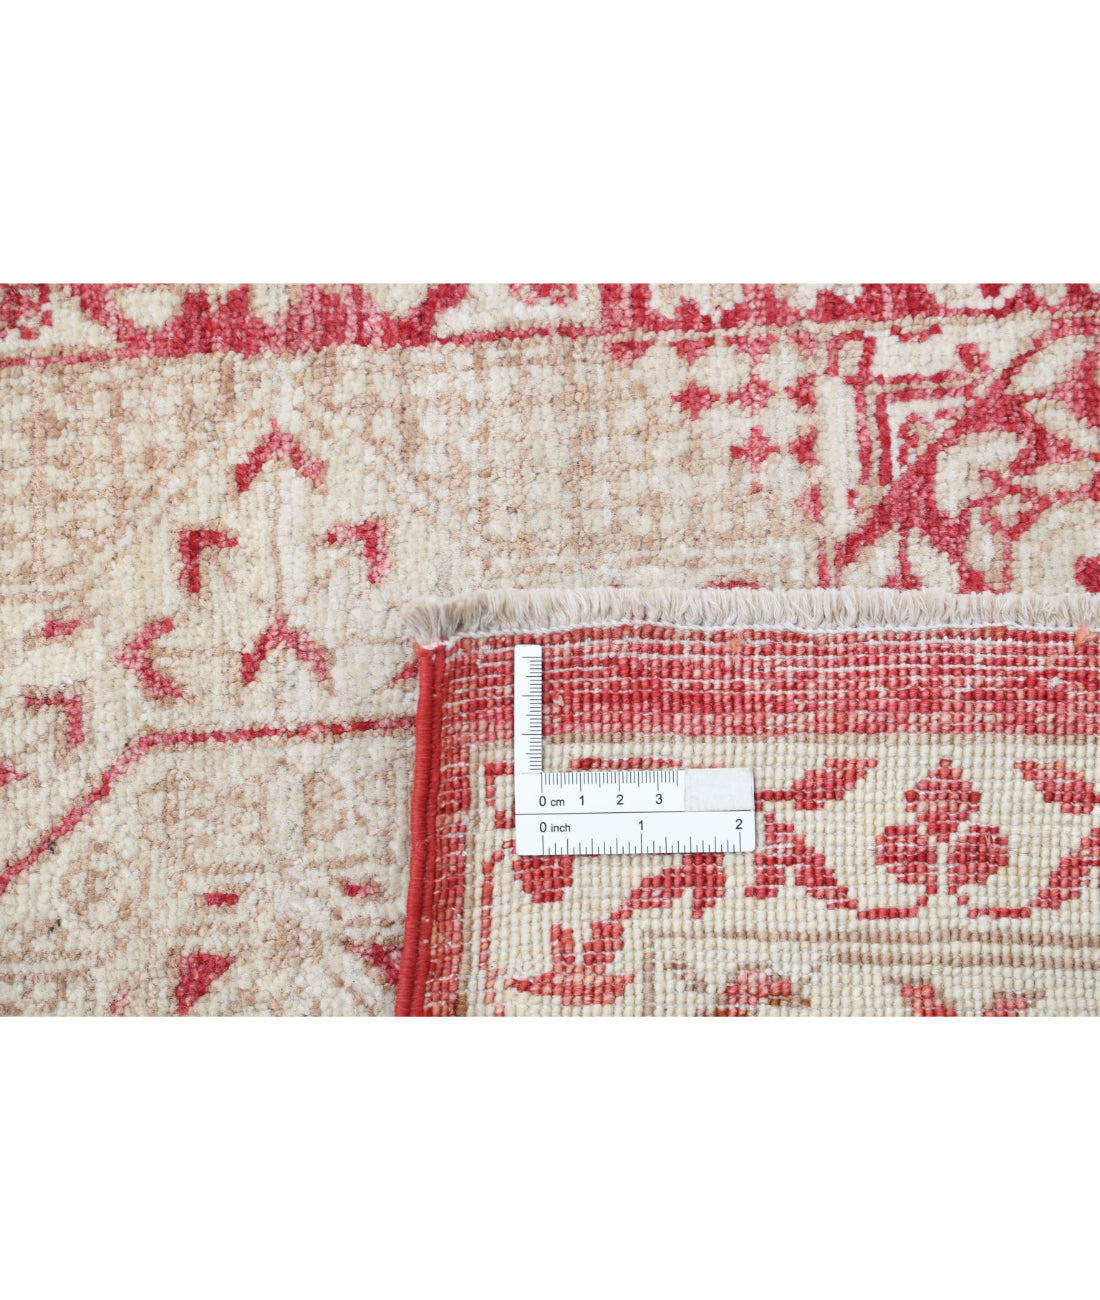 Hand Knotted Fine Mamluk Wool Rug - 8'10'' x 11'9'' 8'10'' x 11'9'' (265 X 353) / Red / Red